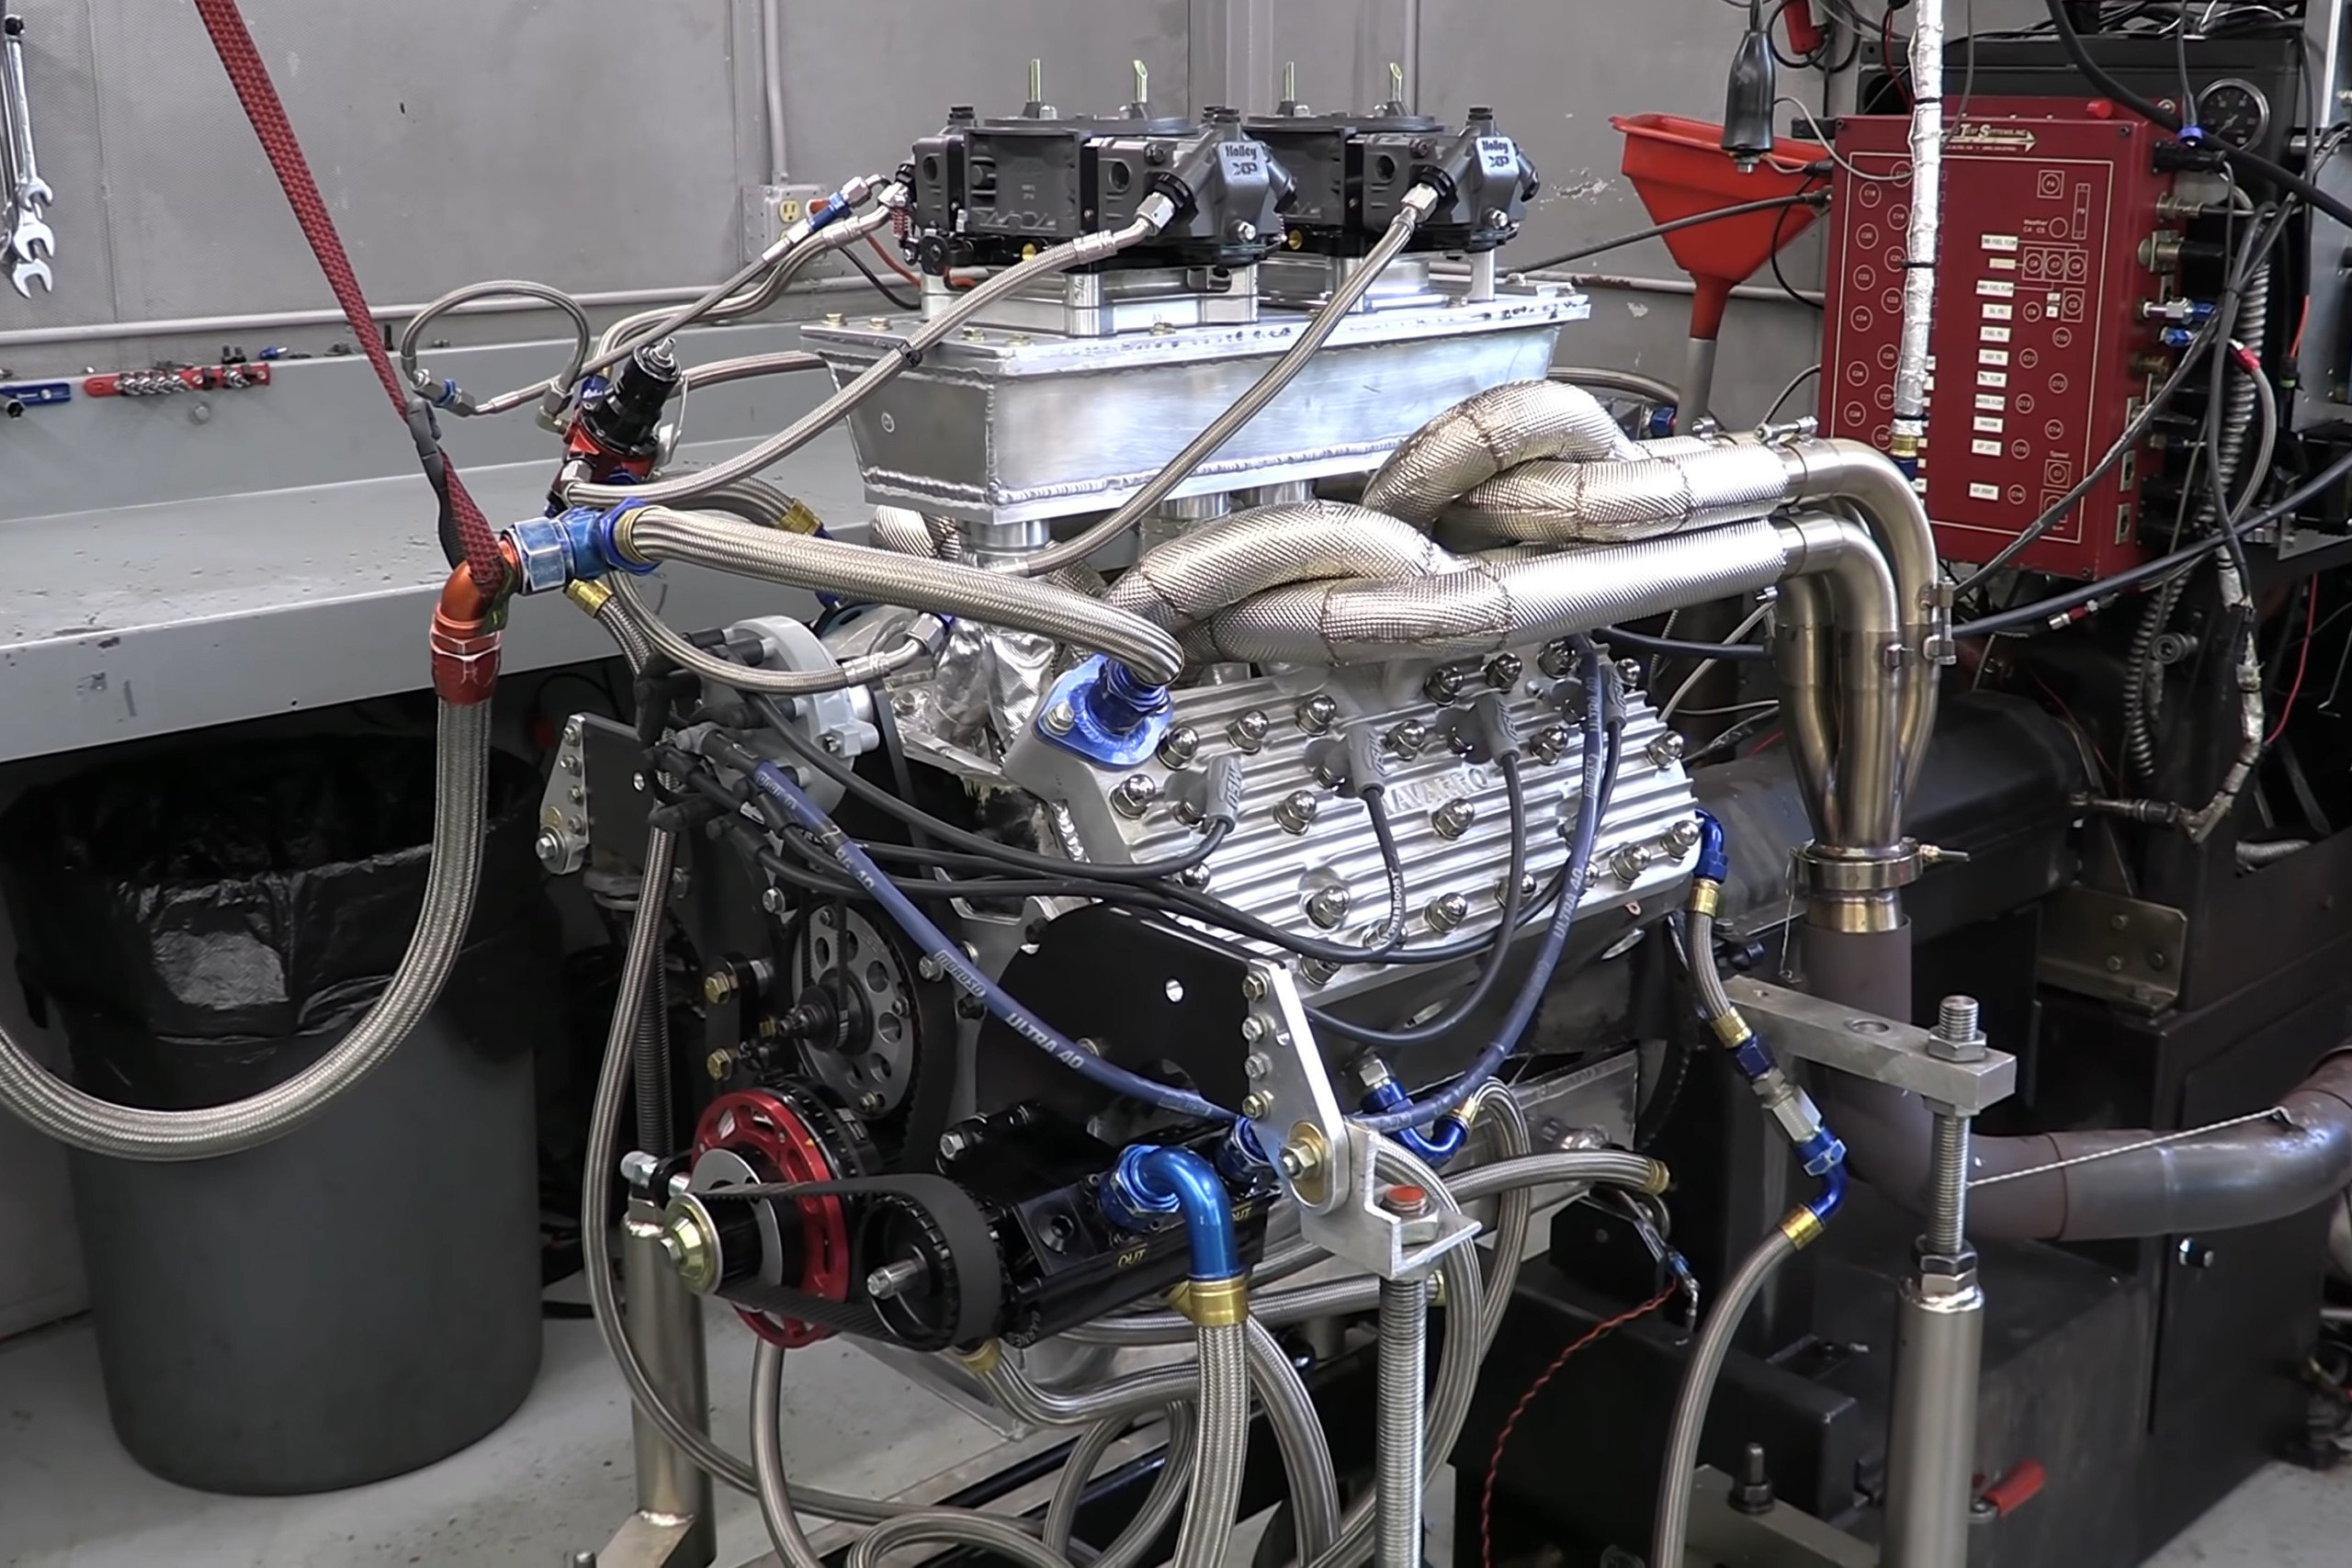 Building The World’s Fastest V8 Flathead Ford With Modern Parts